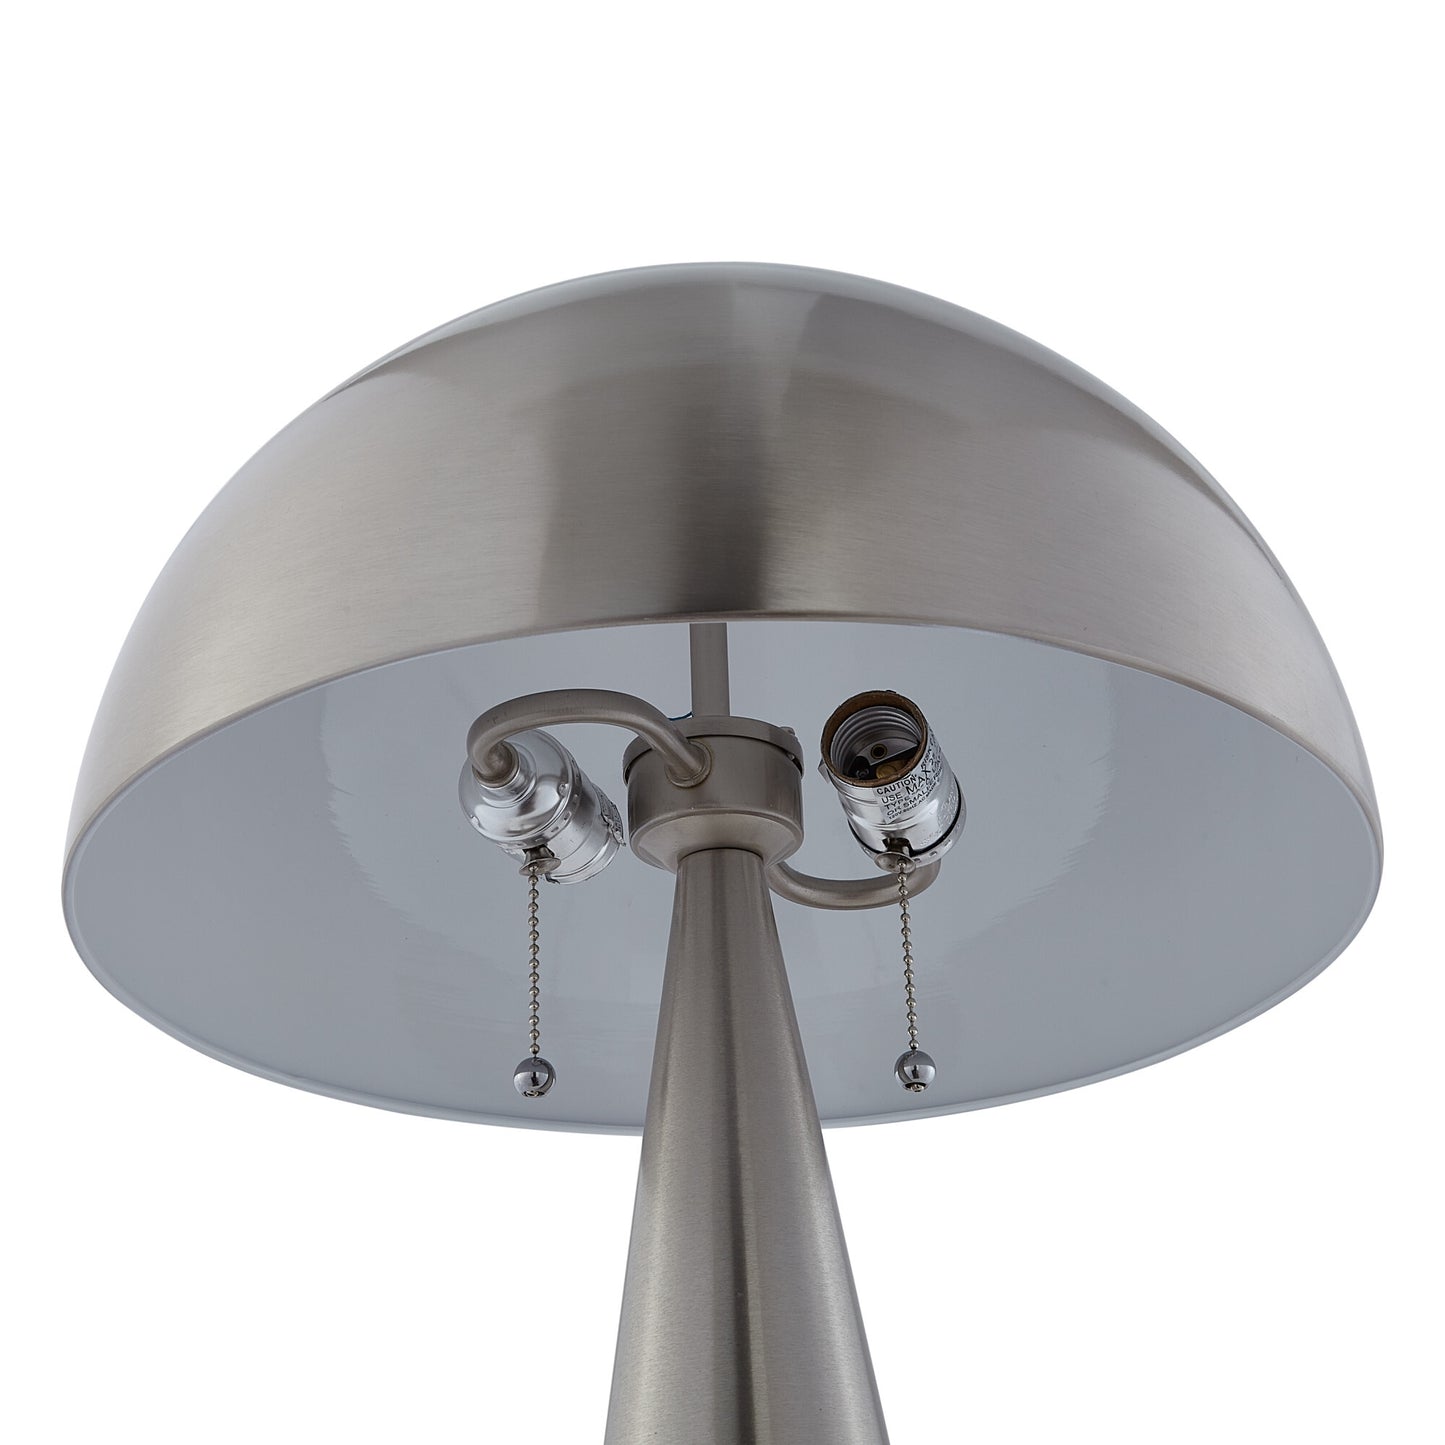 24" Gray Iron Usb Table Lamp With Gray Dome Shade